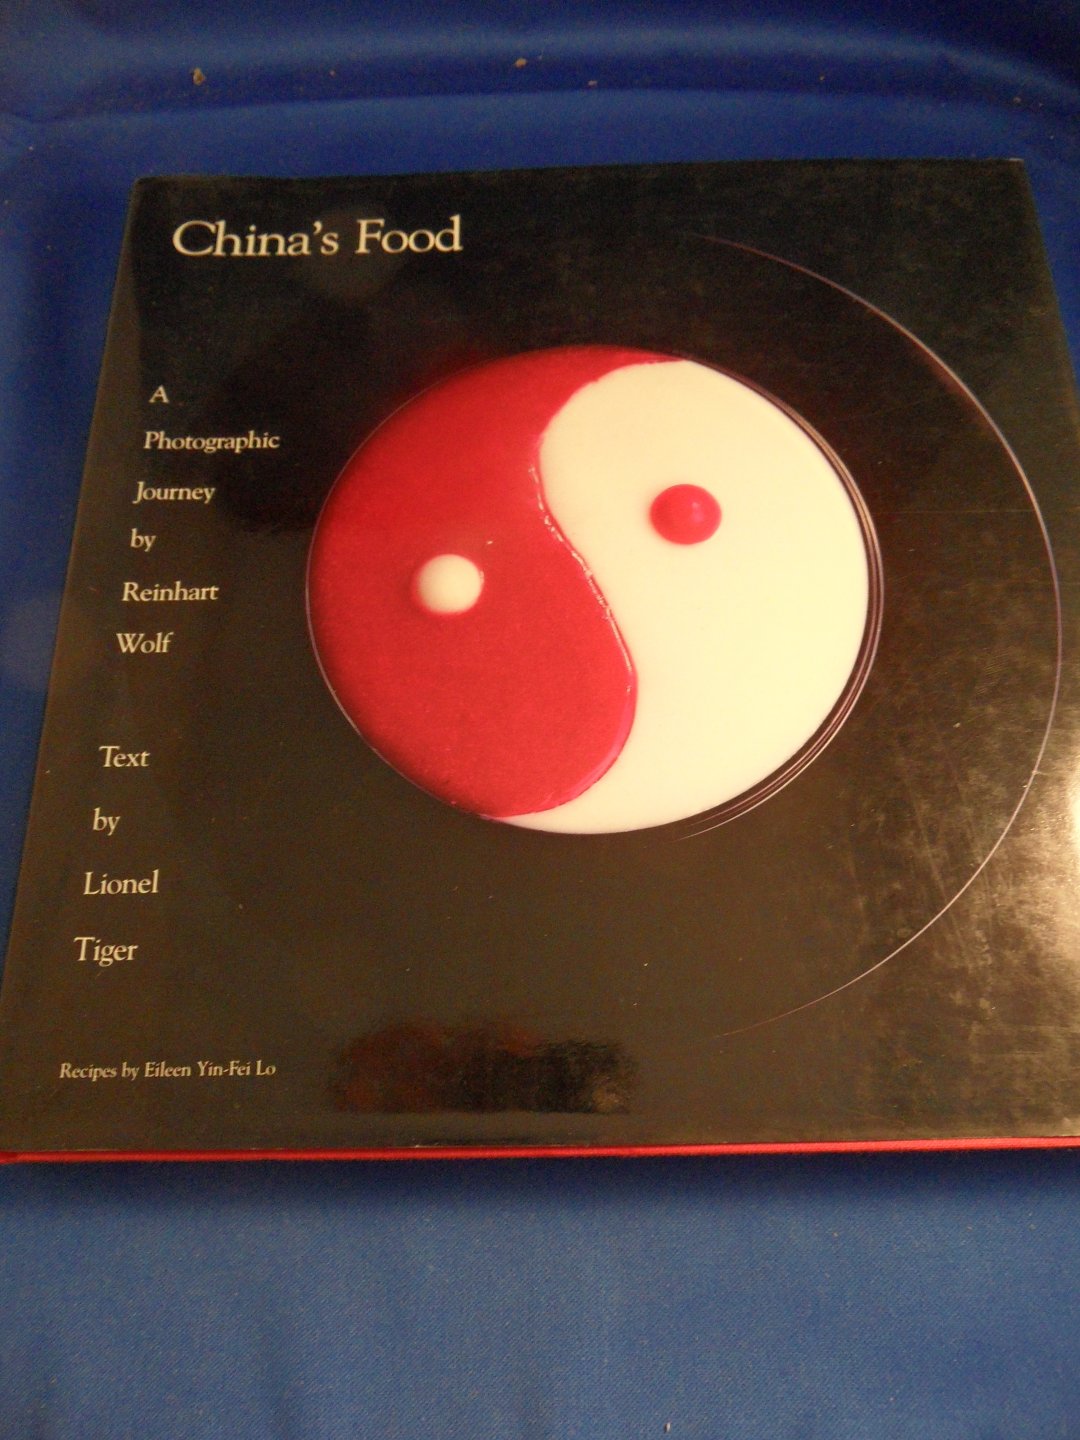 Tiger, Lionel - China's Food. A photographic journey by Reinhart Wolf